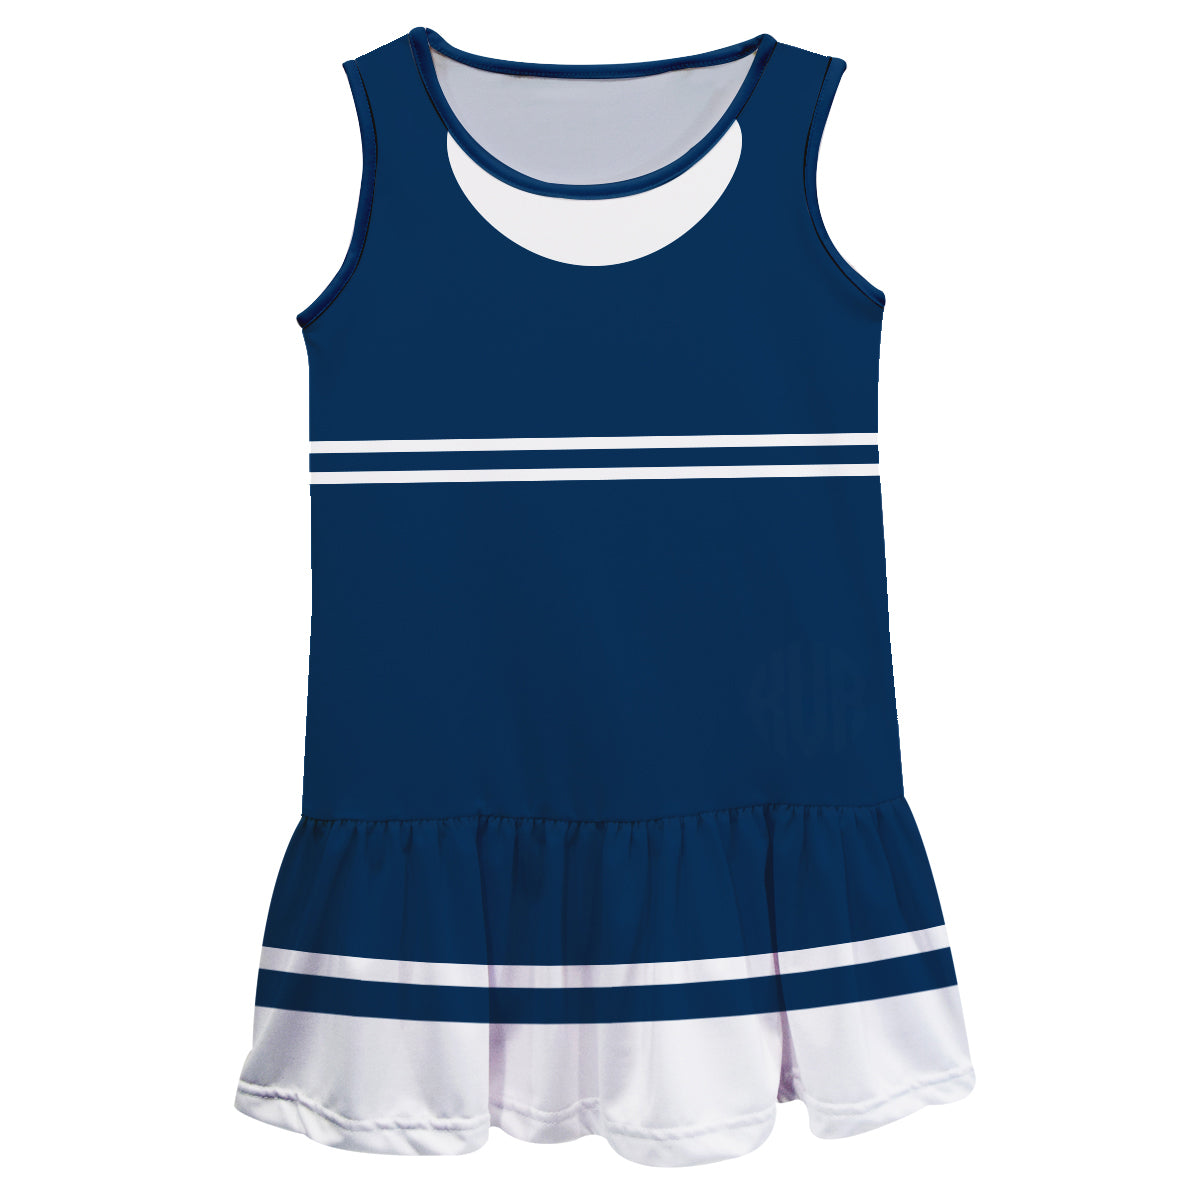 Monogram Navy And White Lily Dress - Wimziy&Co.